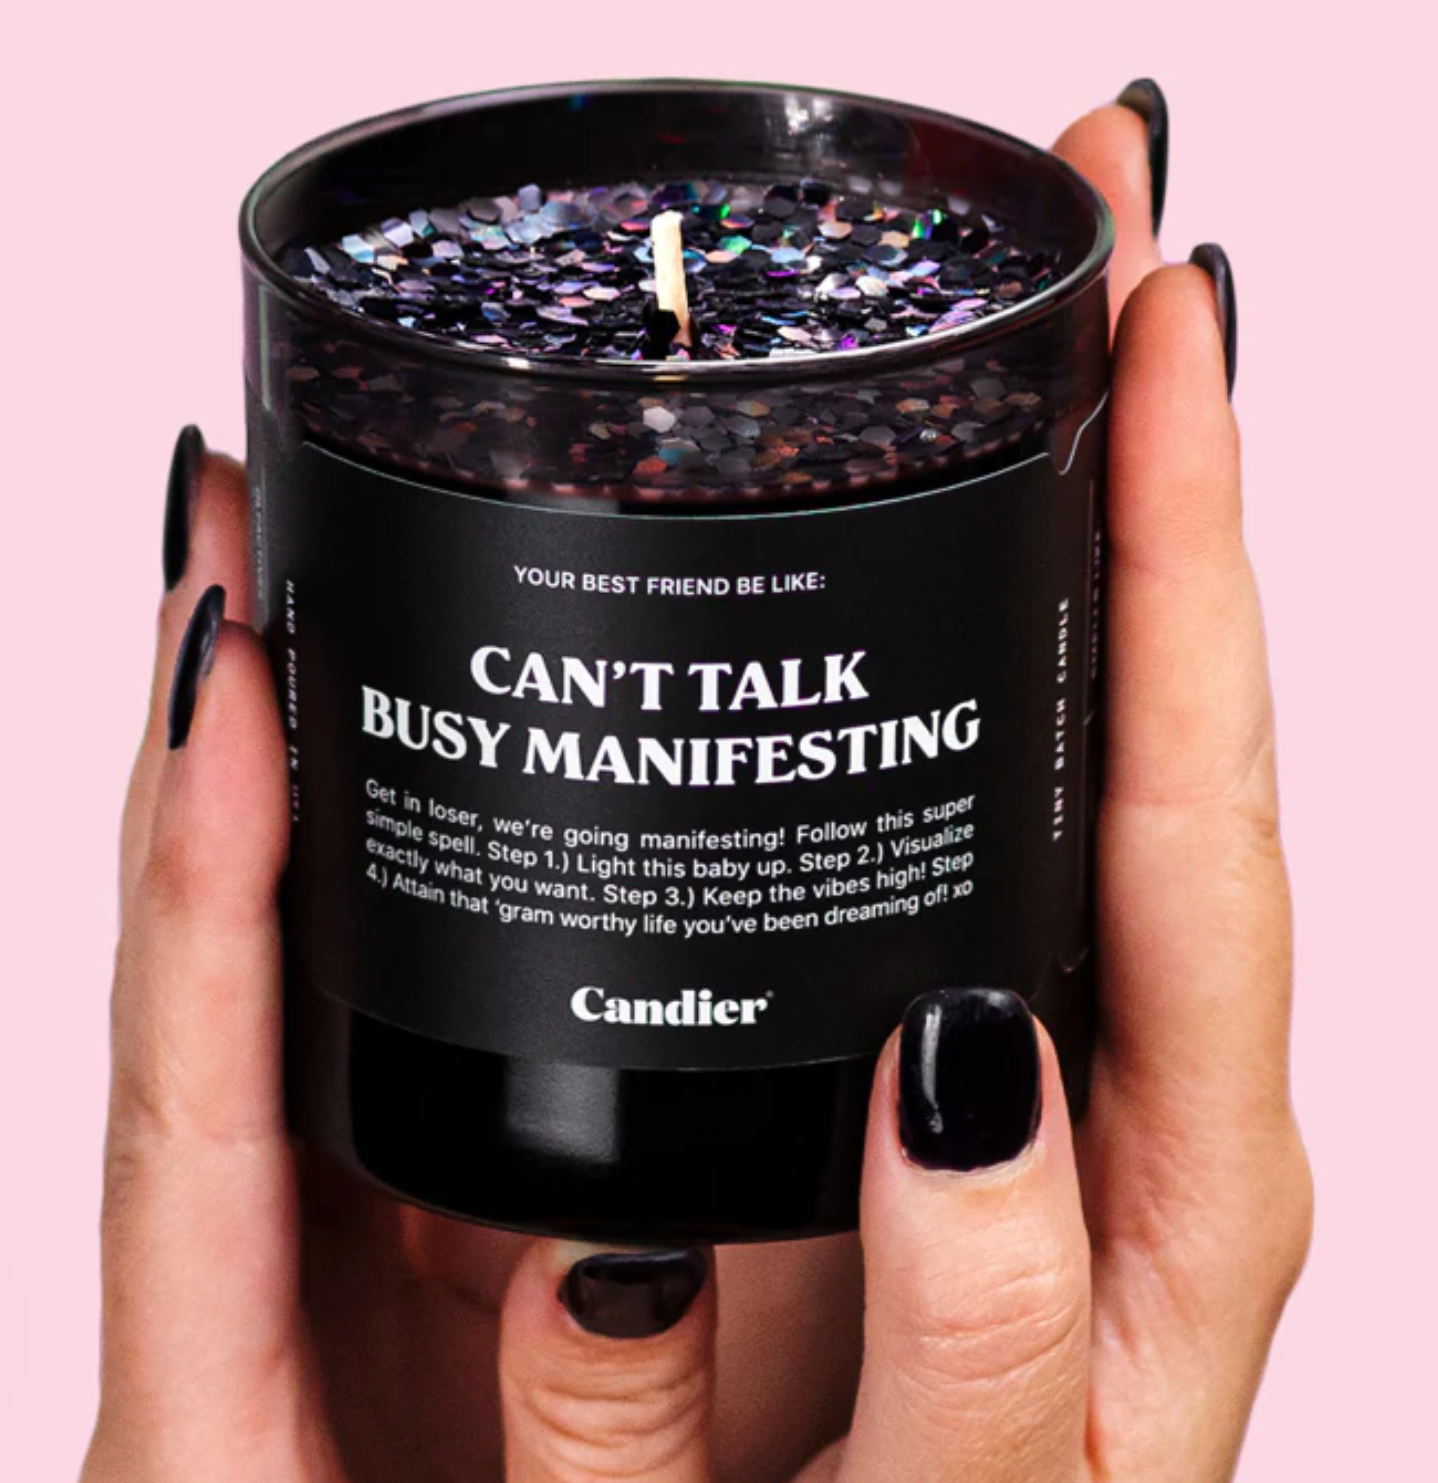 Candier - "Can't talk, busy manifesting" - Soy Candle